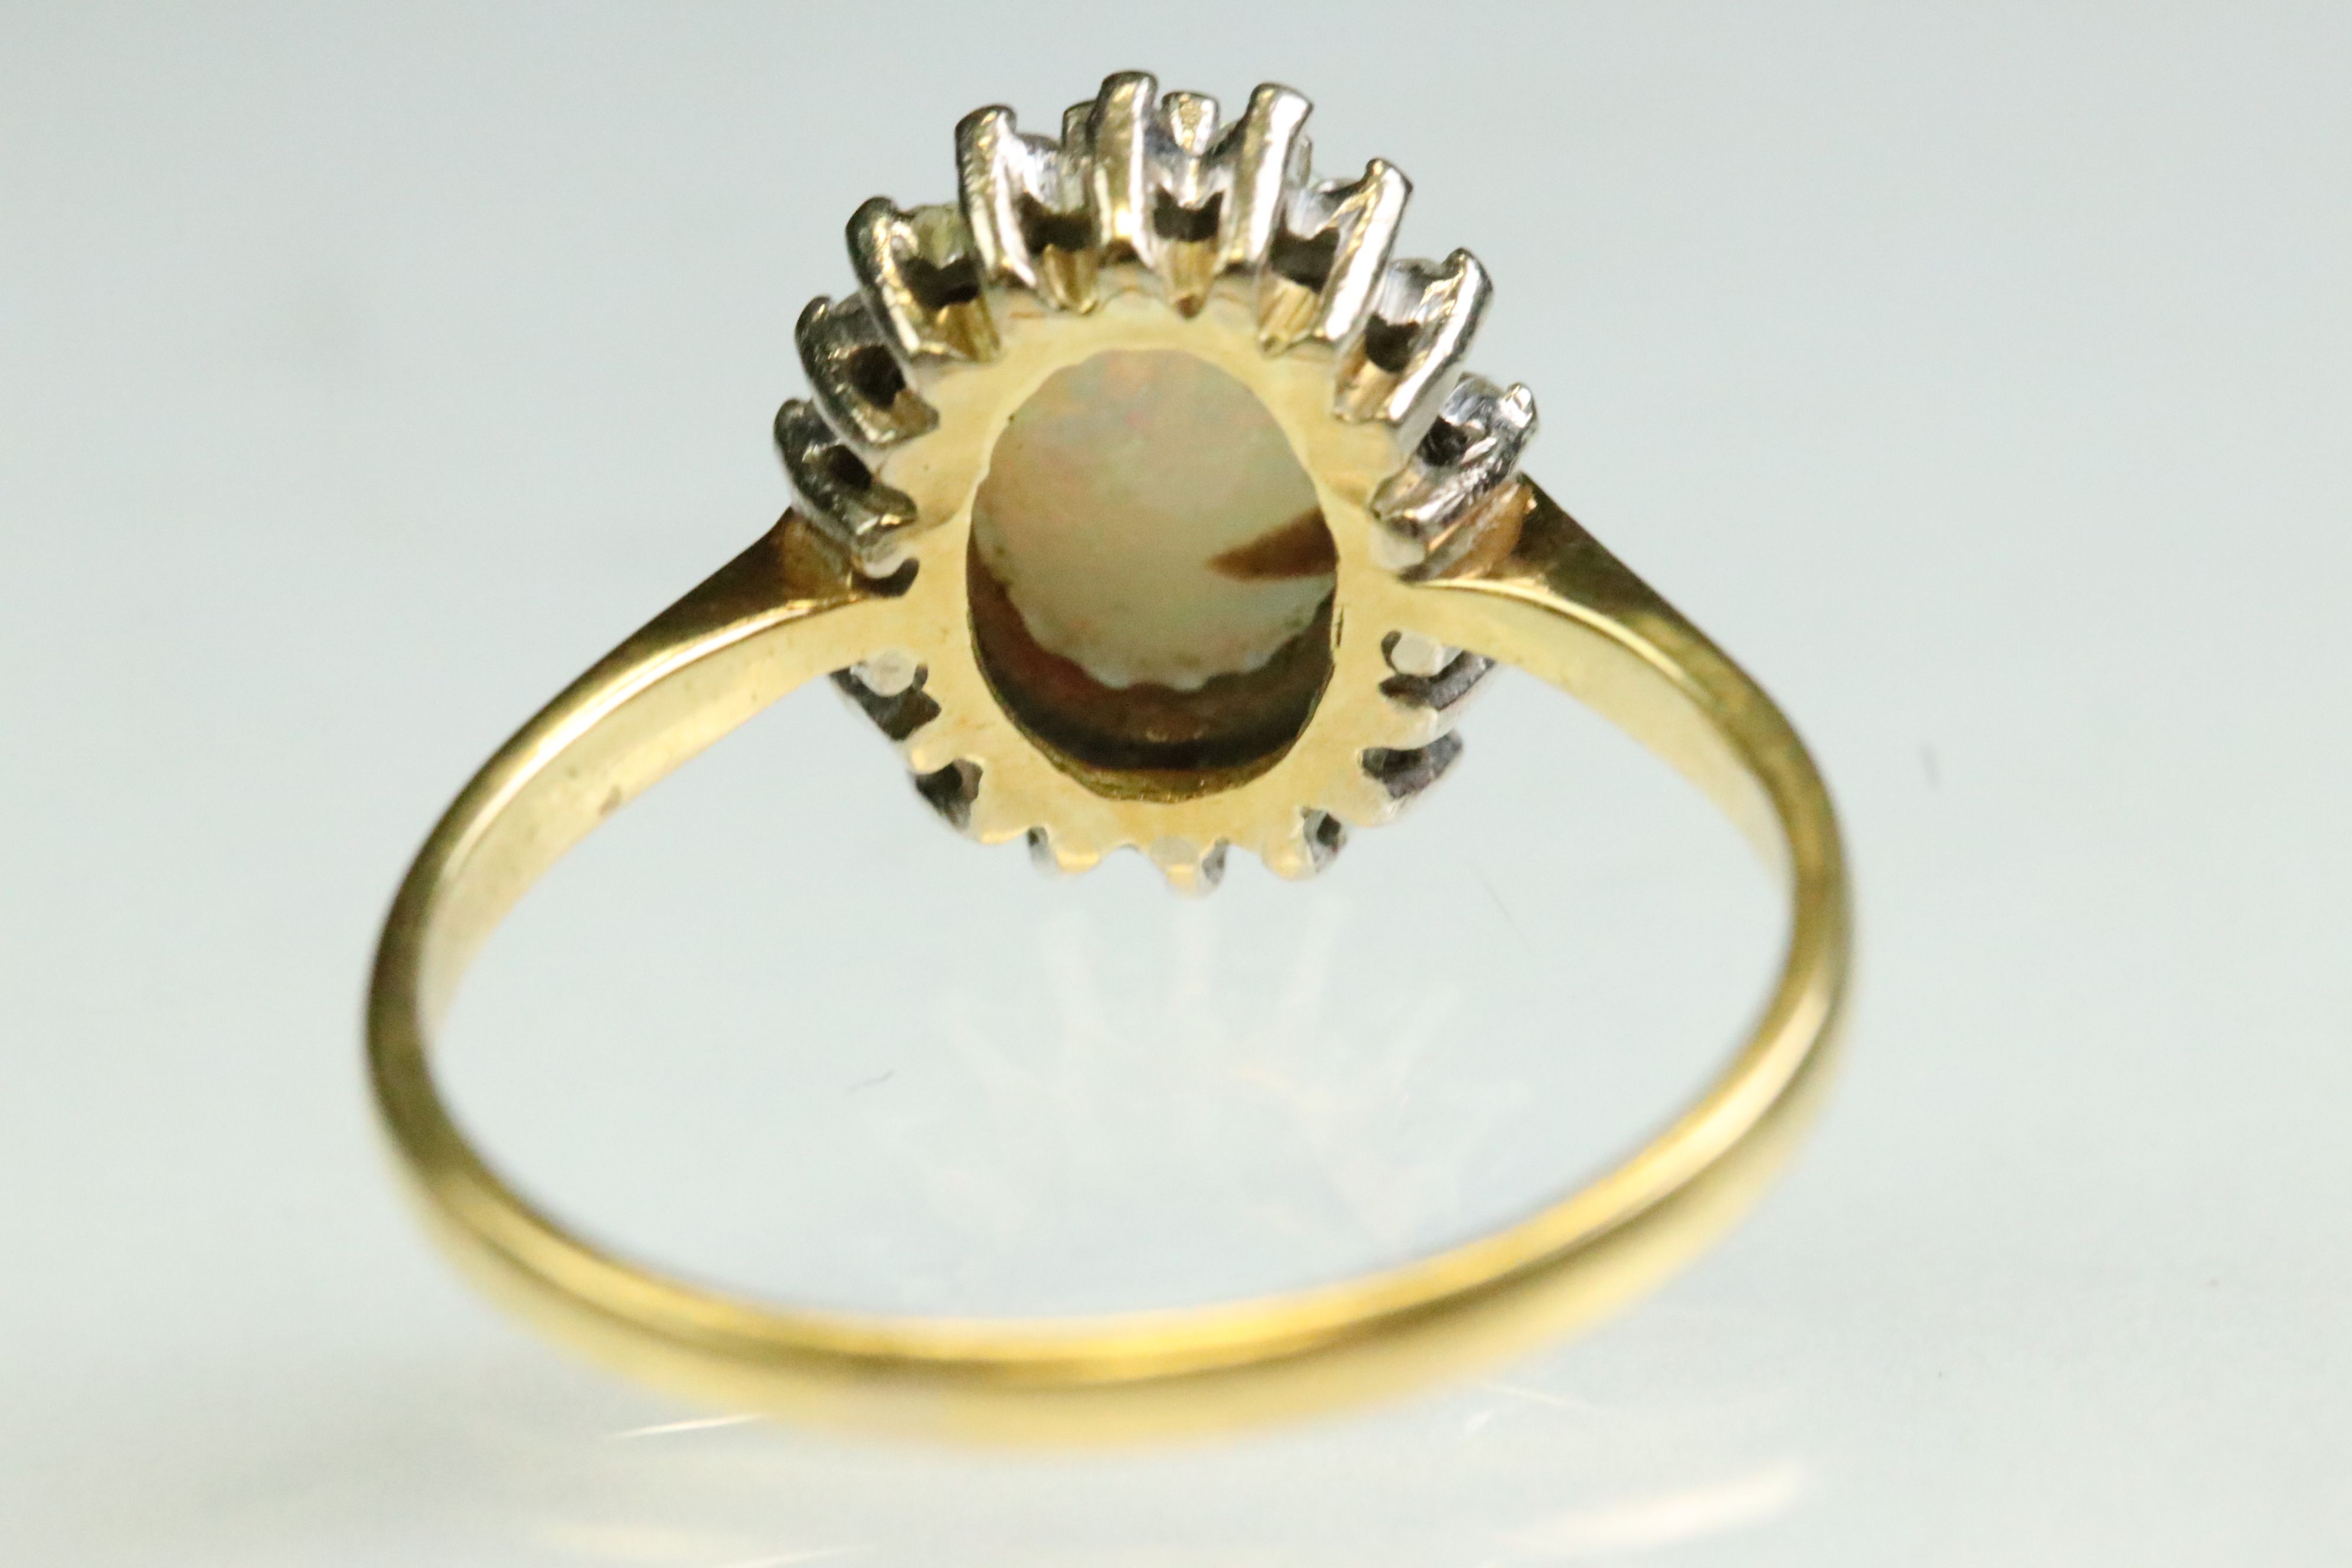 Opal and diamond 18ct yellow and white gold set cluster ring, the precious white opal displaying - Image 6 of 7